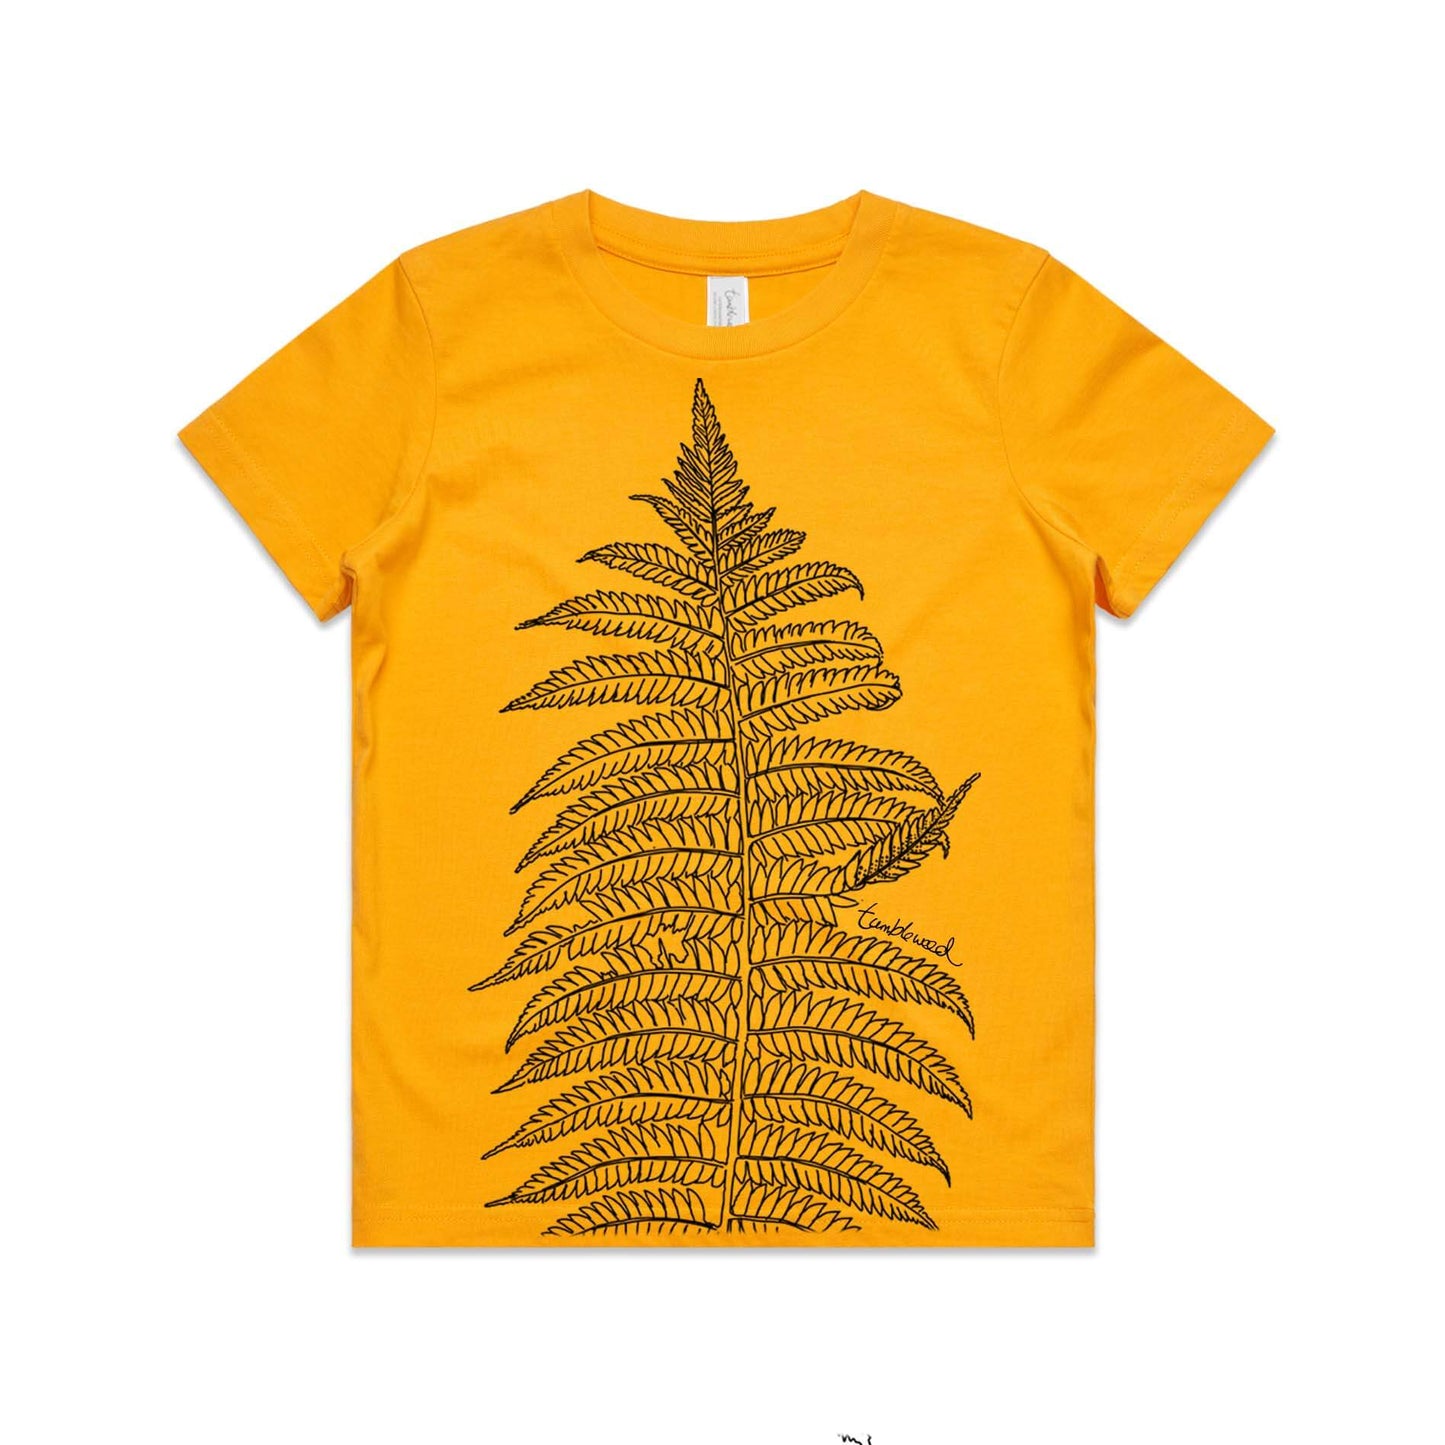 Gold, cotton kids' t-shirt with screen printed Silver fern/ponga design.